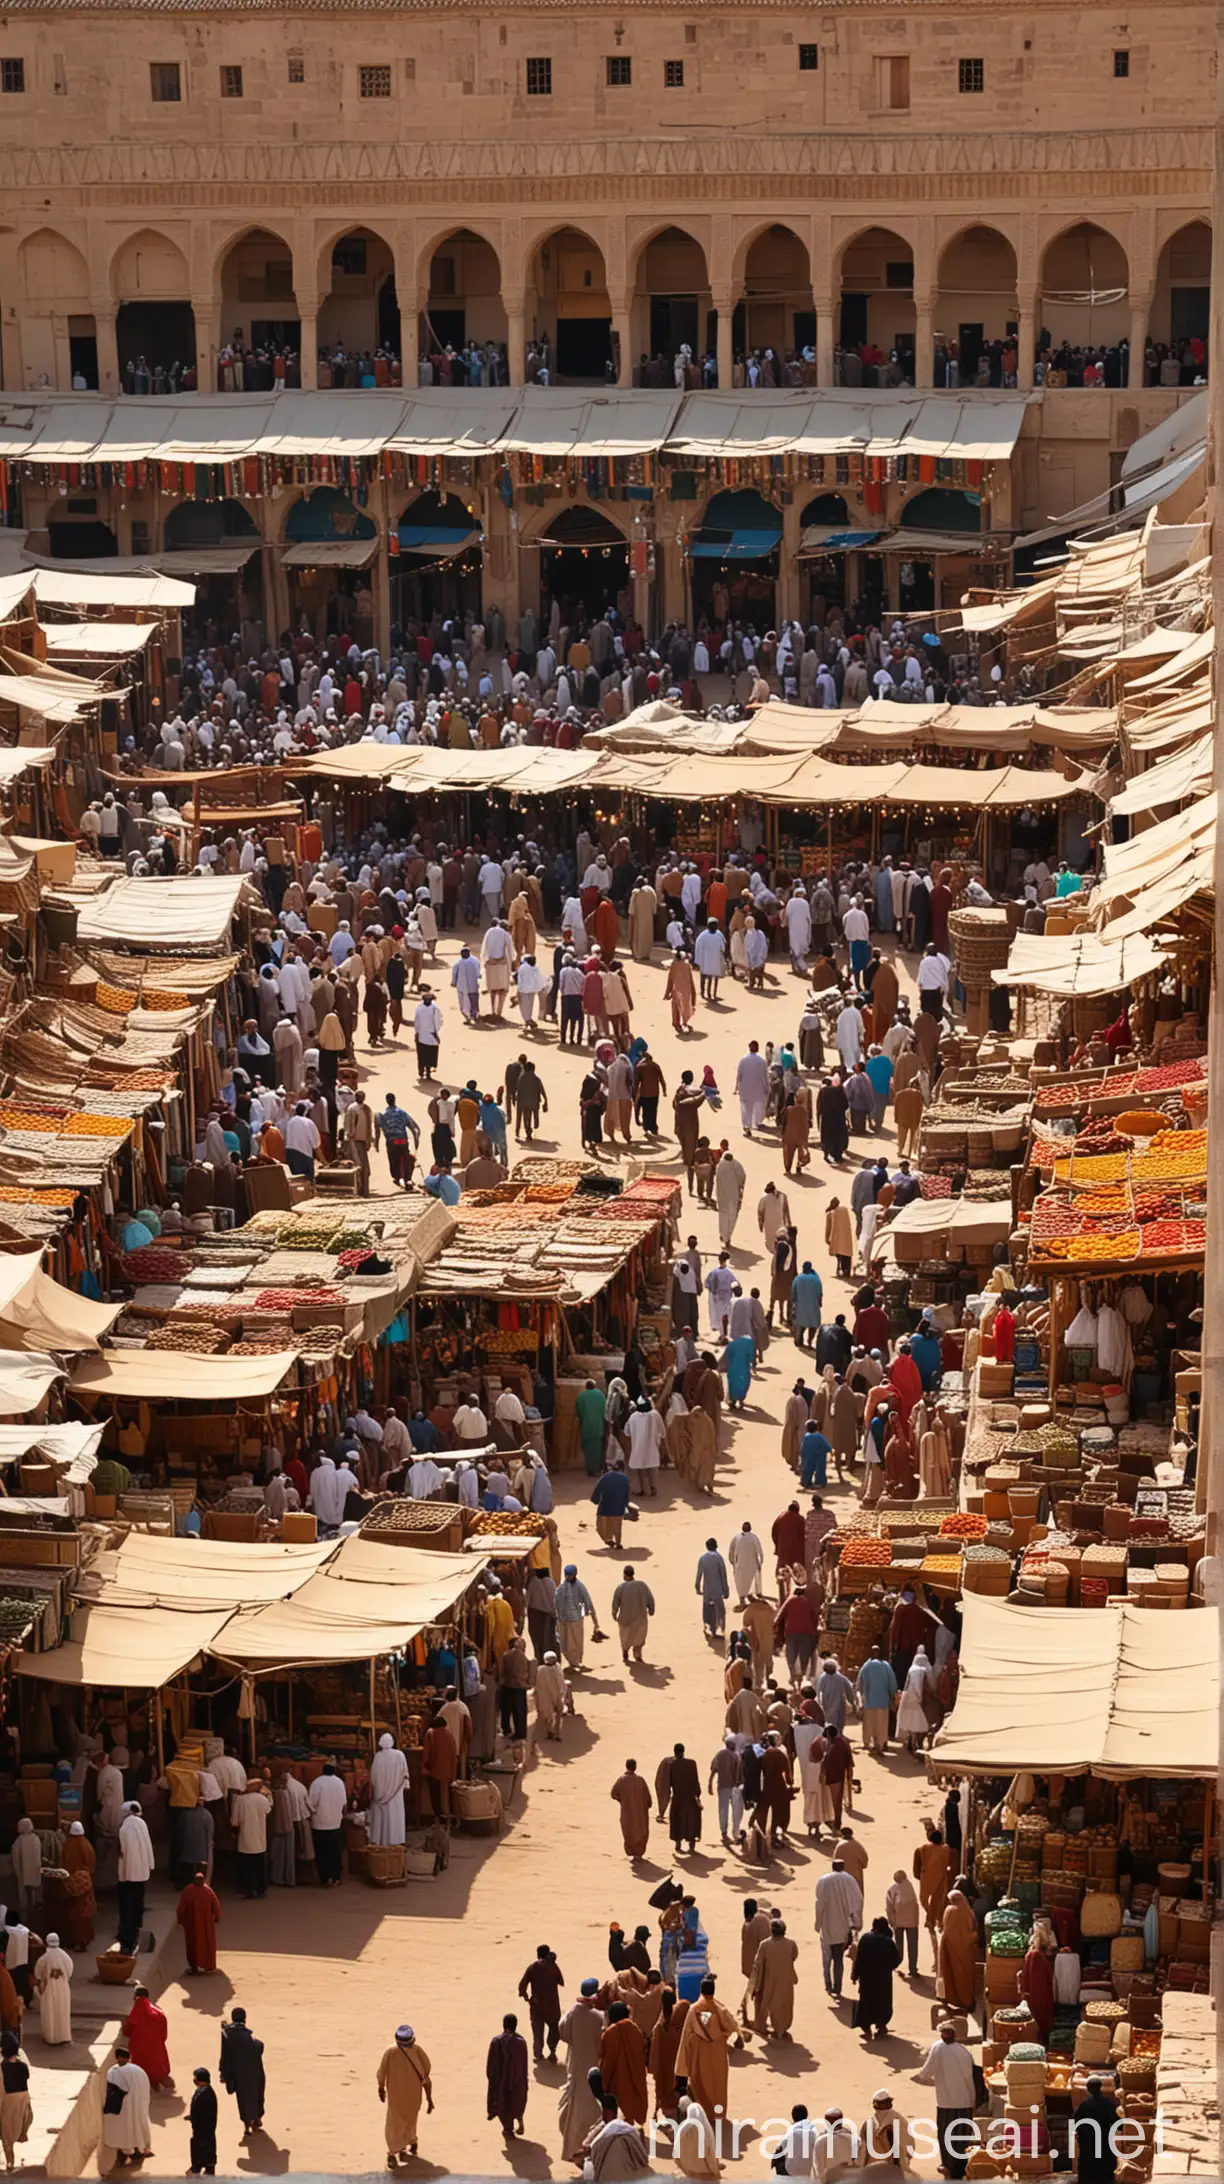 Image: A bustling marketplace in ancient Medina.
Description: Crowds of merchants and shoppers gather in the marketplace, with stalls filled with goods ranging from spices and textiles to pottery and livestock. The scene reflects the vibrant economic activity fostered by Prophet Muhammad's reforms, with people engaging in fair trade and commerce. with islamic era tradition , HD and 4k